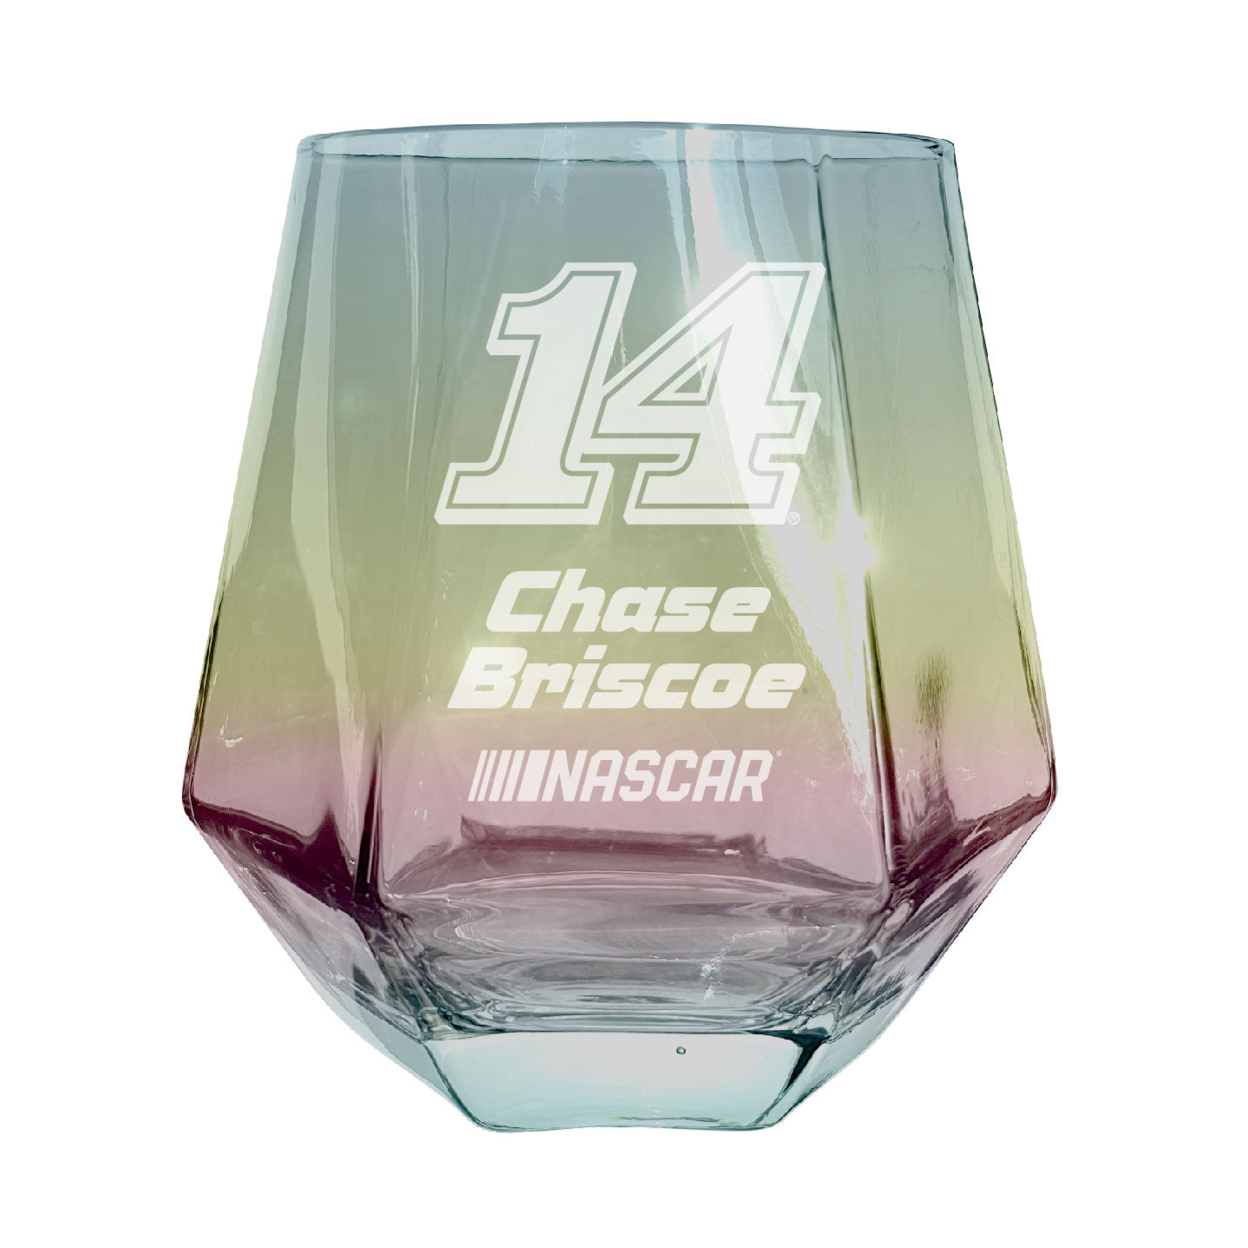 #14 Chase Briscoe Officially Licensed 10 Oz Engraved Diamond Wine Glass - Grey, 2-Pack